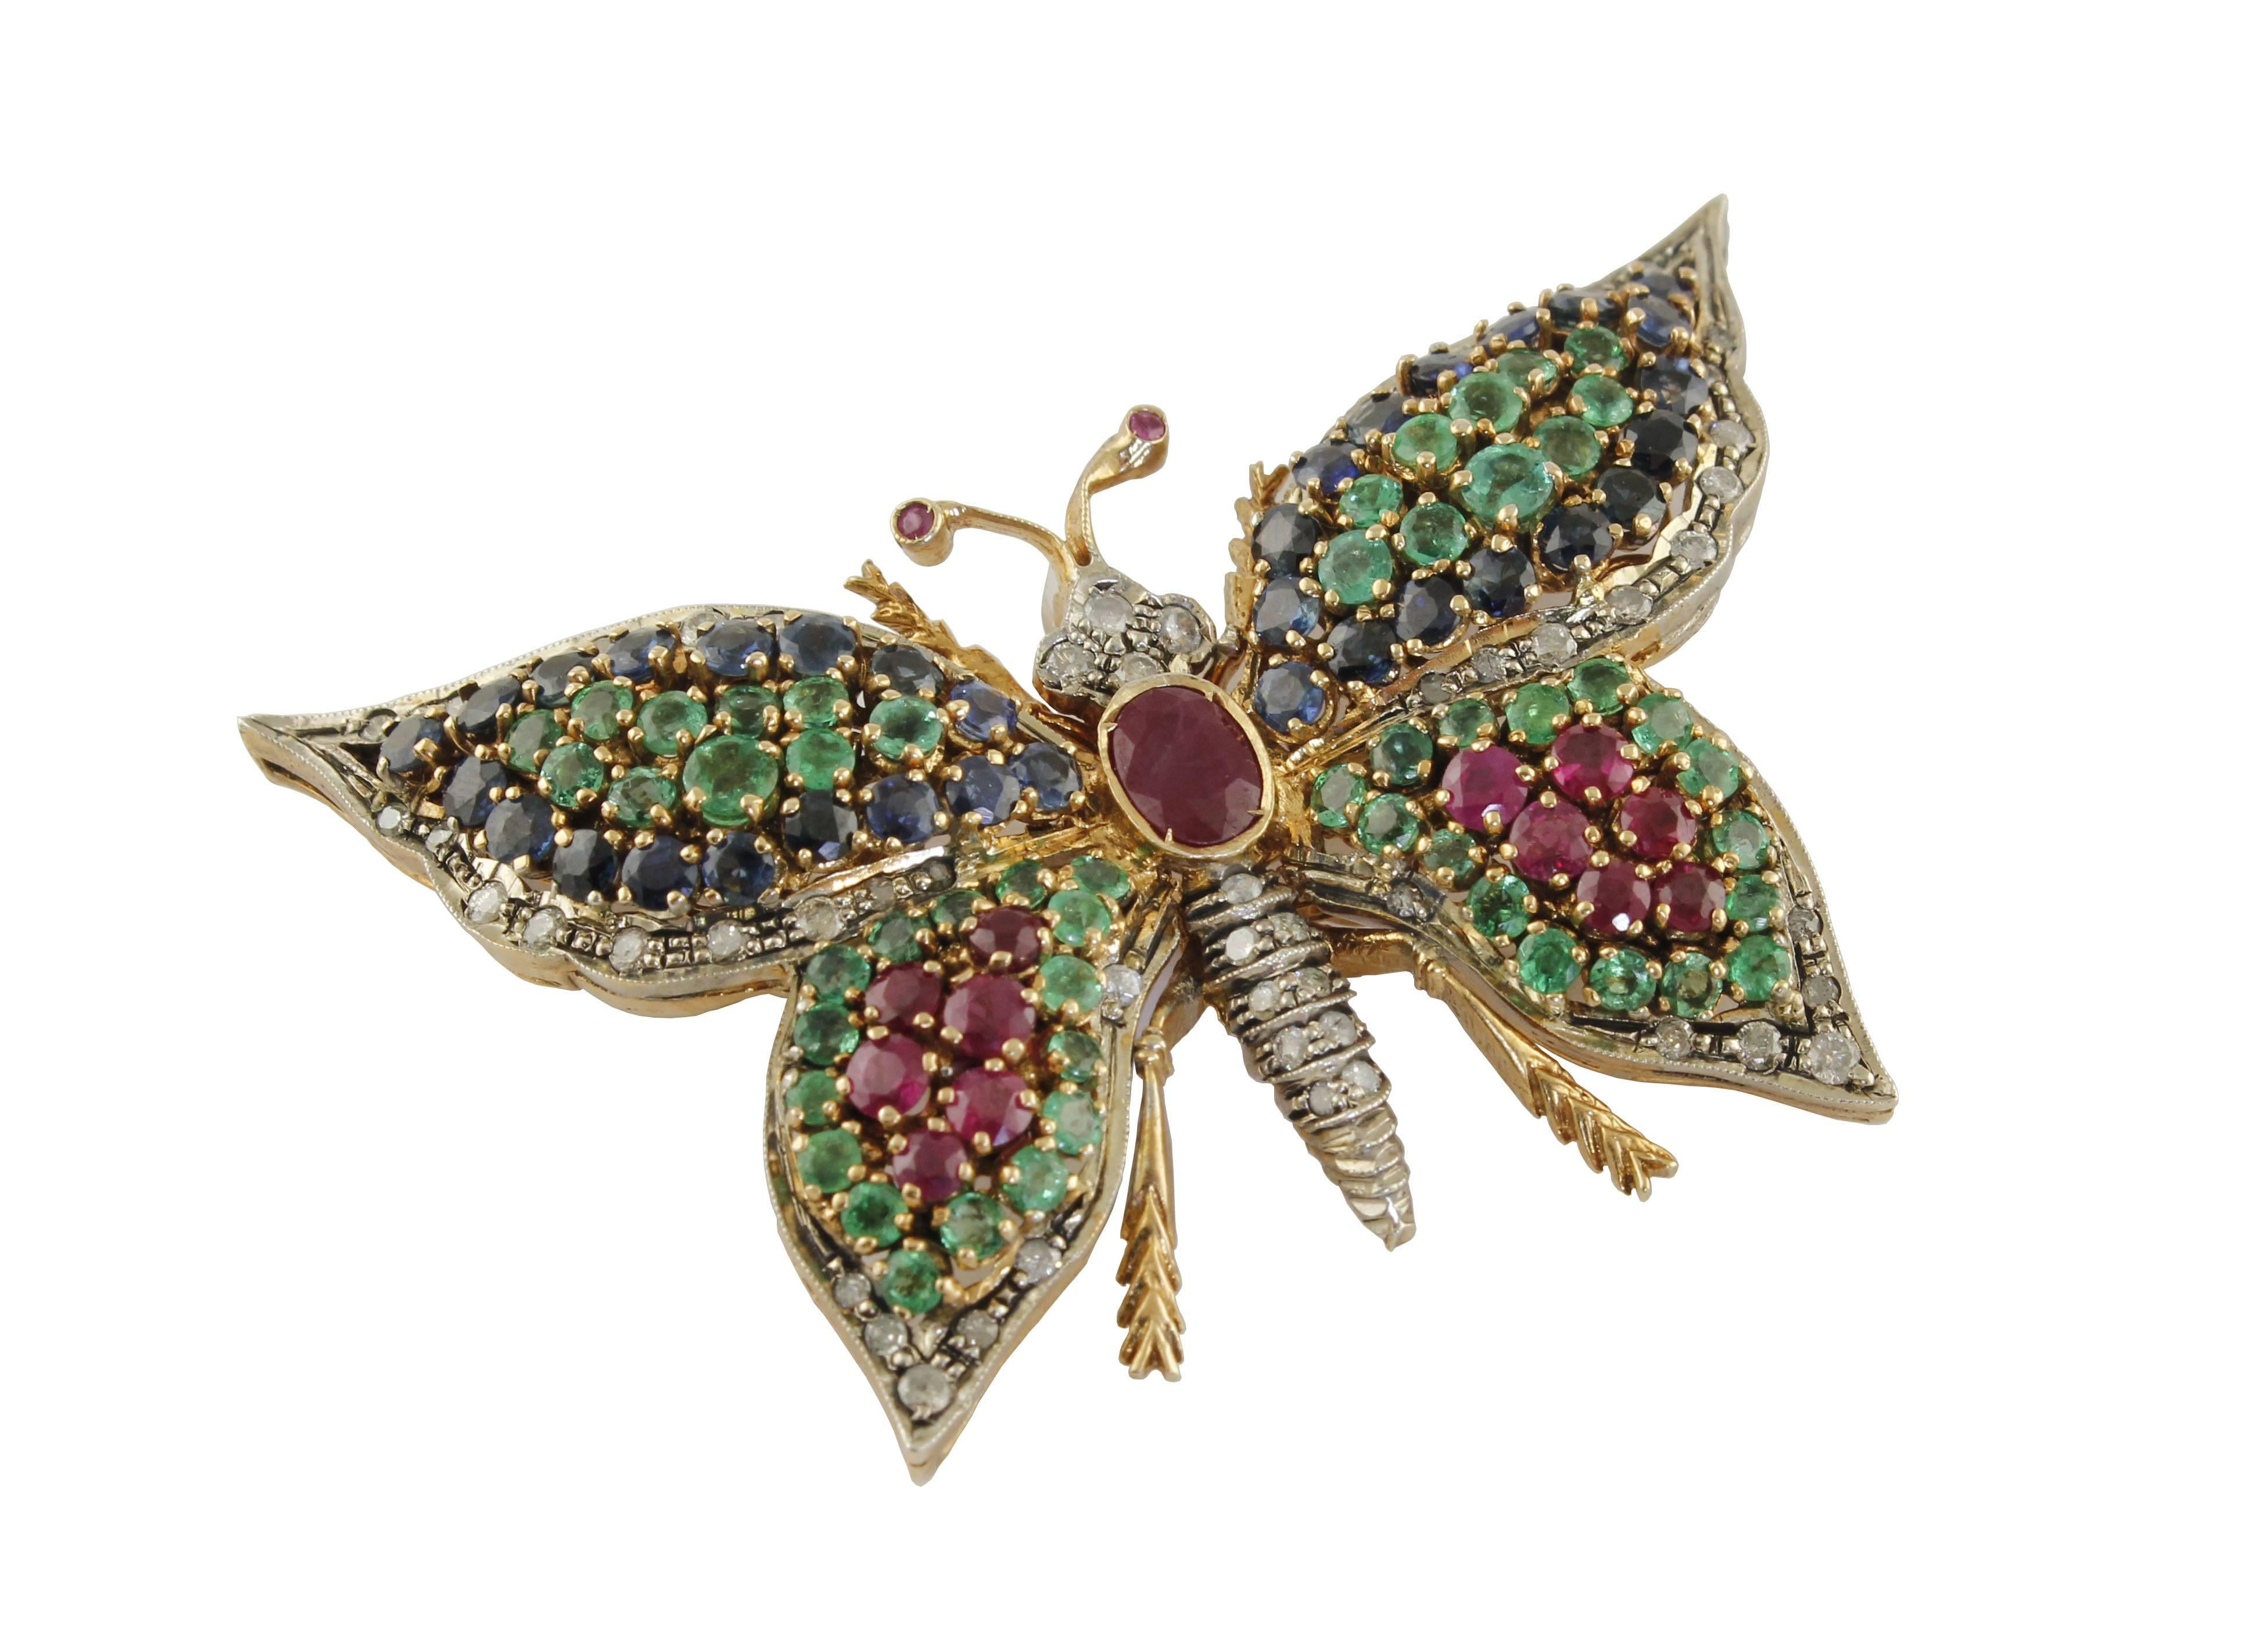  Rubies Emeralds Blue Sapphires Butterfly Pendant Necklace/Brooch 3